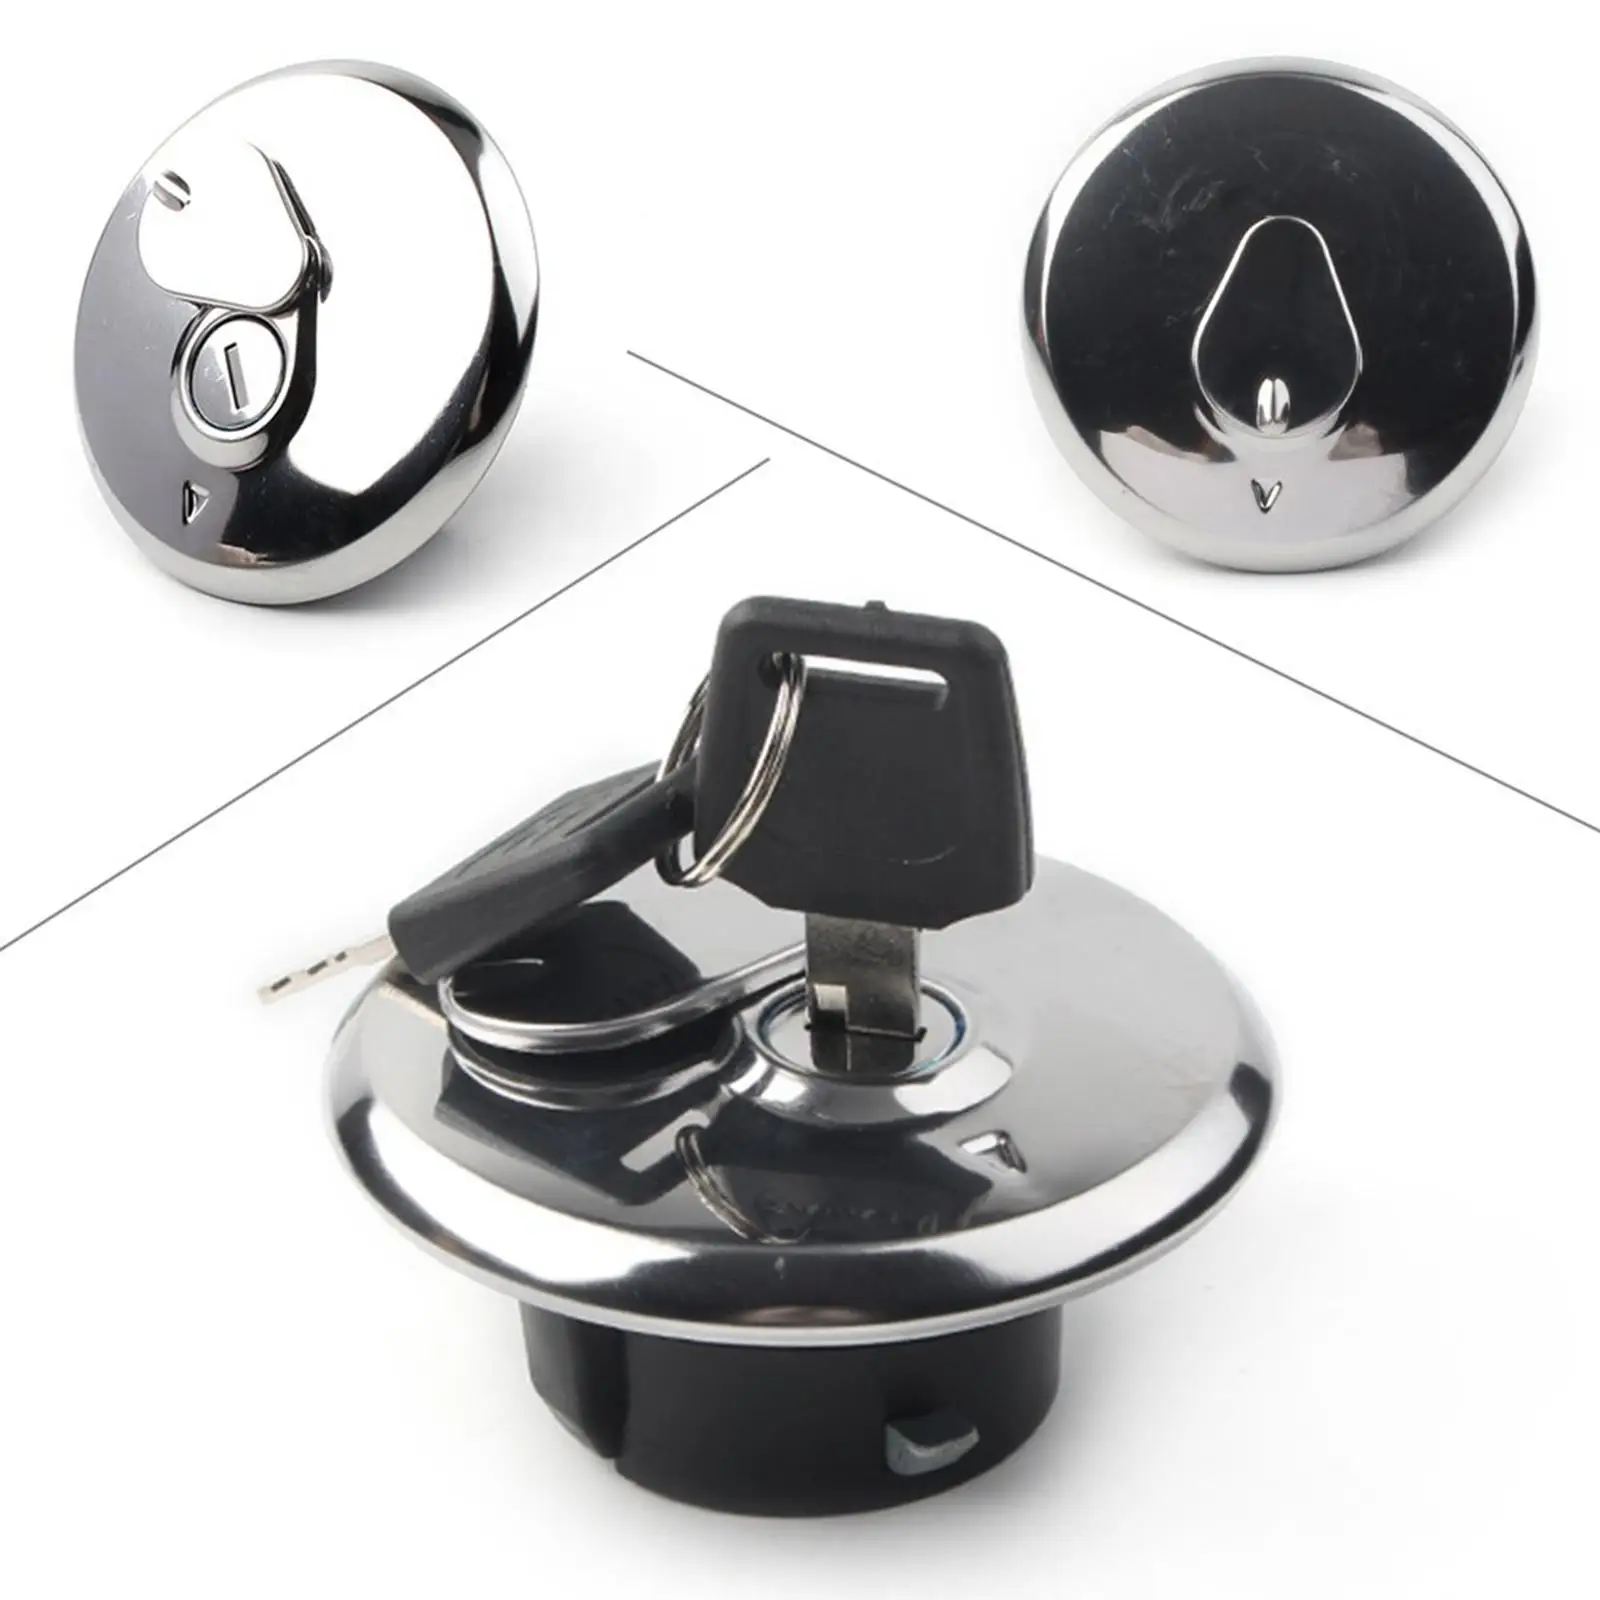 Aluminum Alloy Motorcycle Fuel Gas Tank Cap Cover with Lock Keys Replacement for Suzuki Gn125 Supplies Parts Accessories